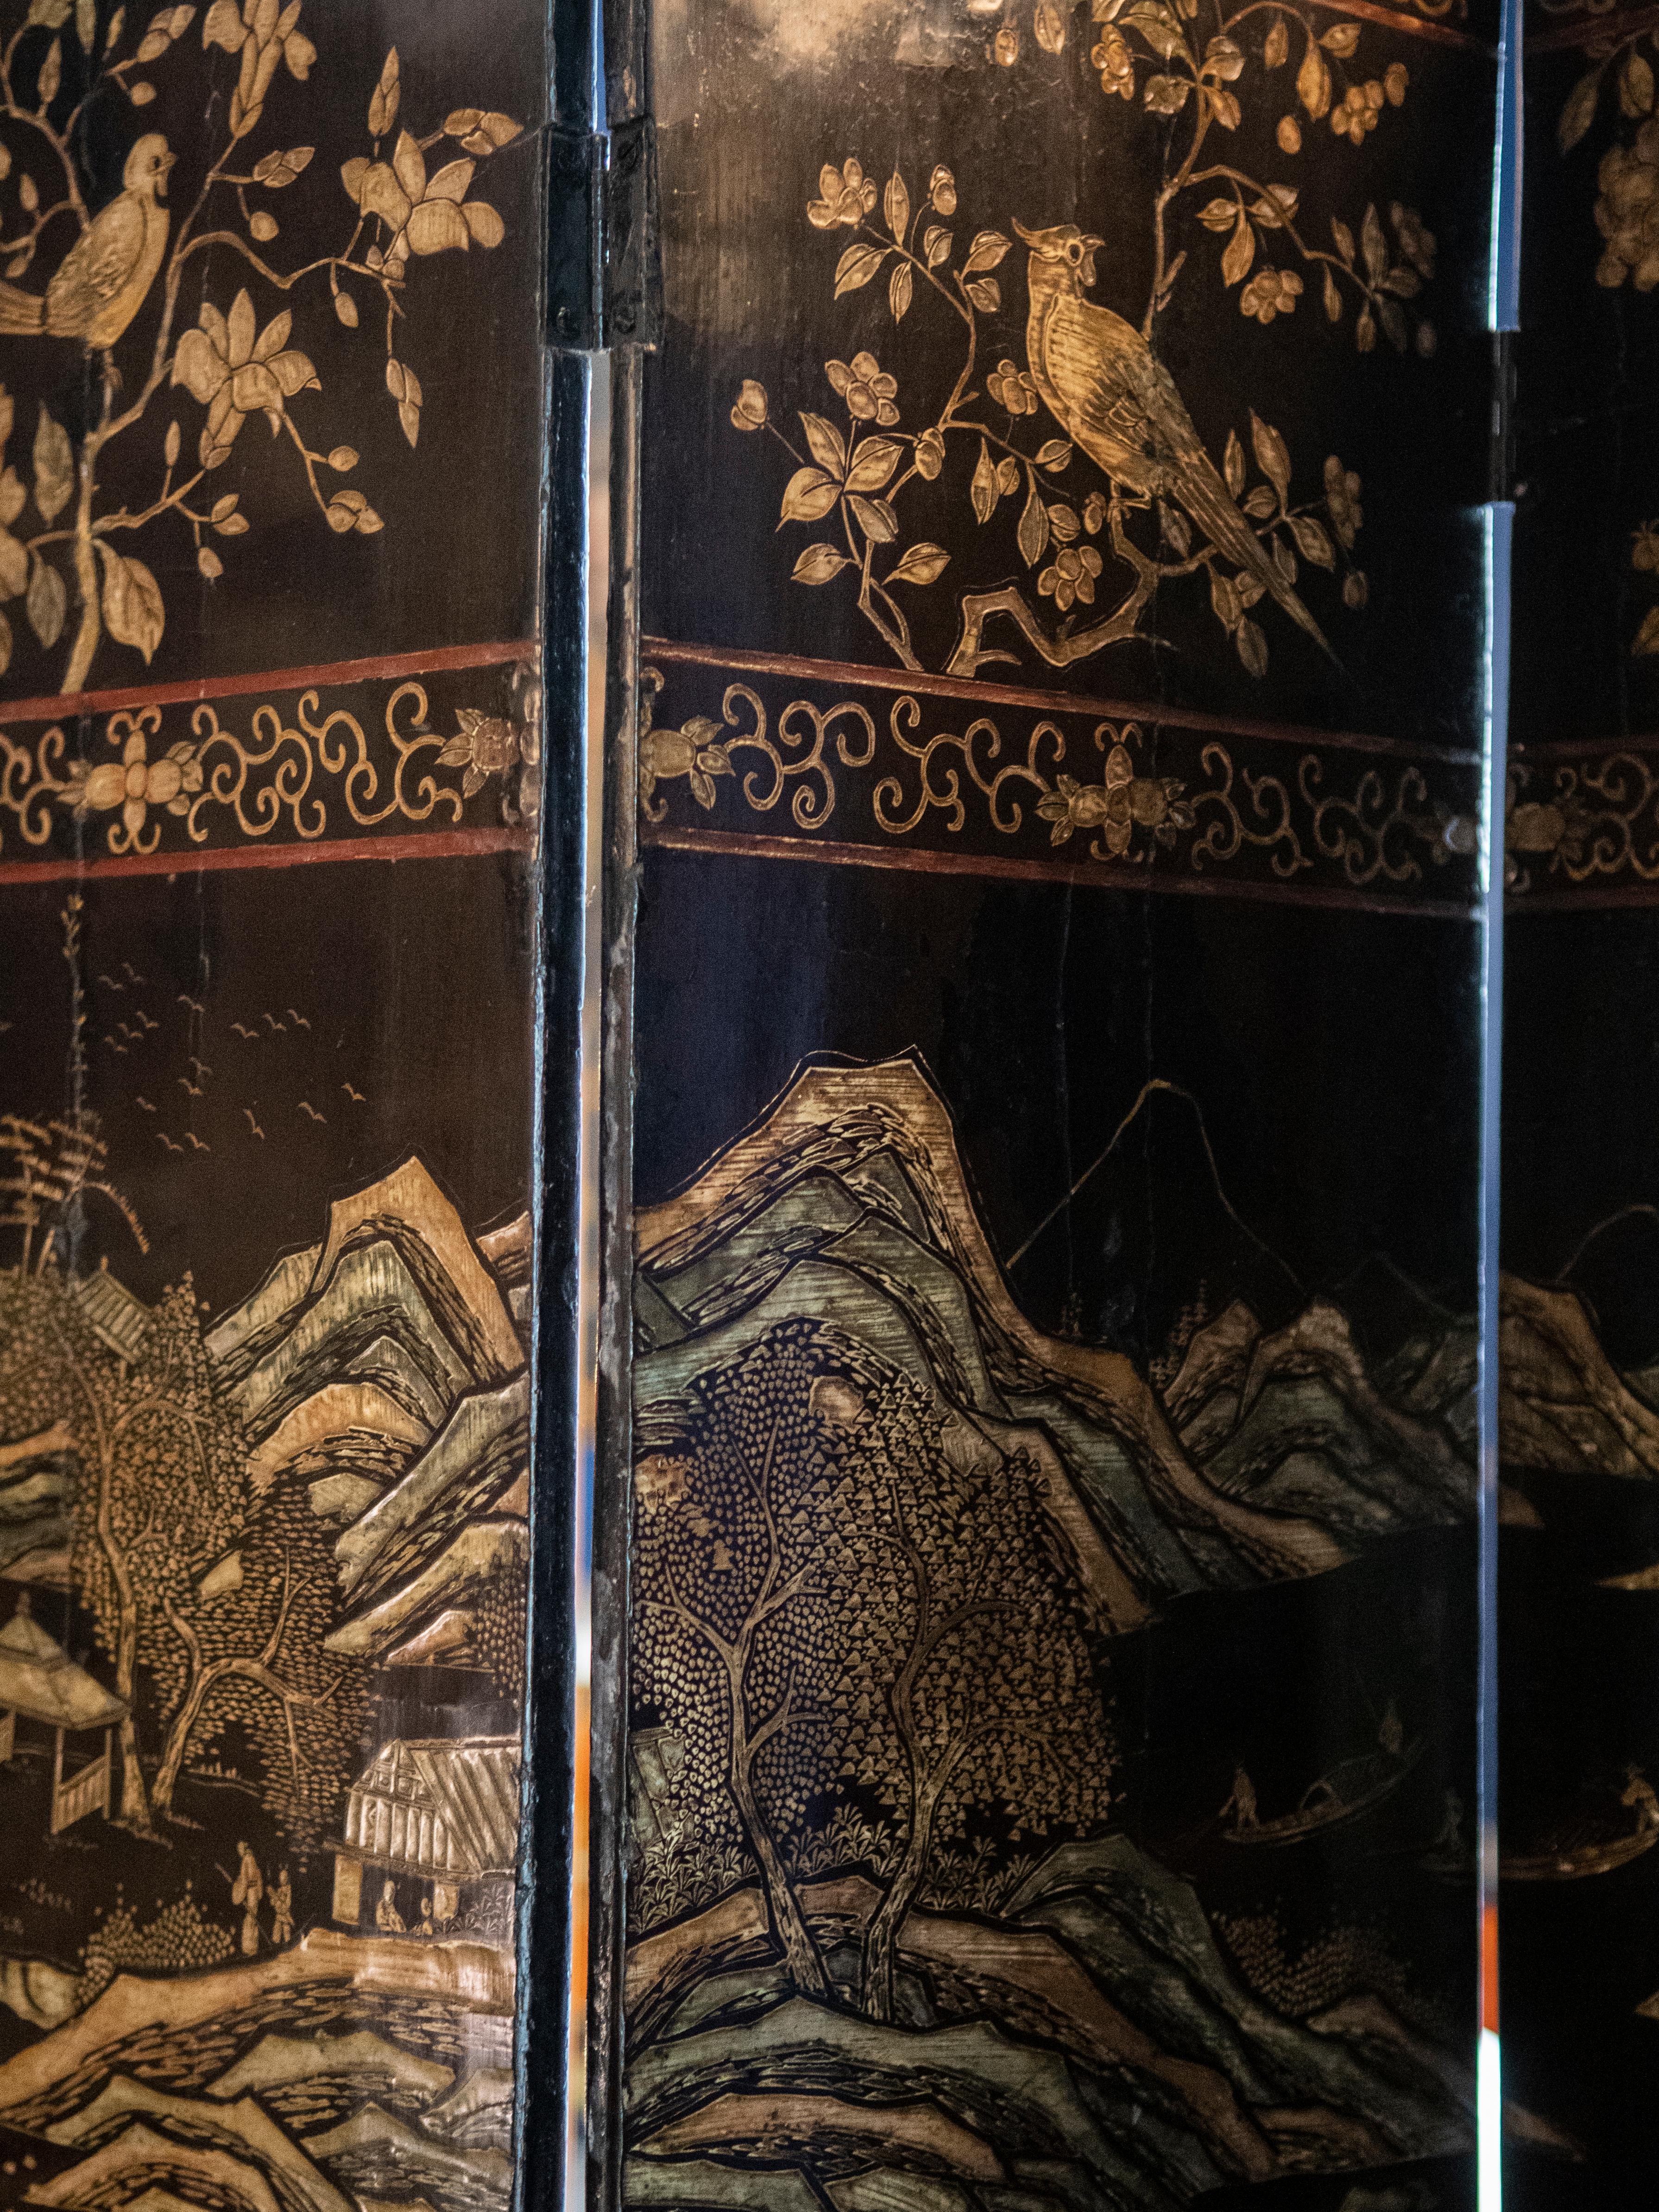 
Transport yourself back to the opulent splendor of the 18th century with this magnificent Chinese five-panel black Coromandel screen, a true masterpiece of artistic and cultural heritage. Painstakingly crafted by skilled artisans, its panels depict